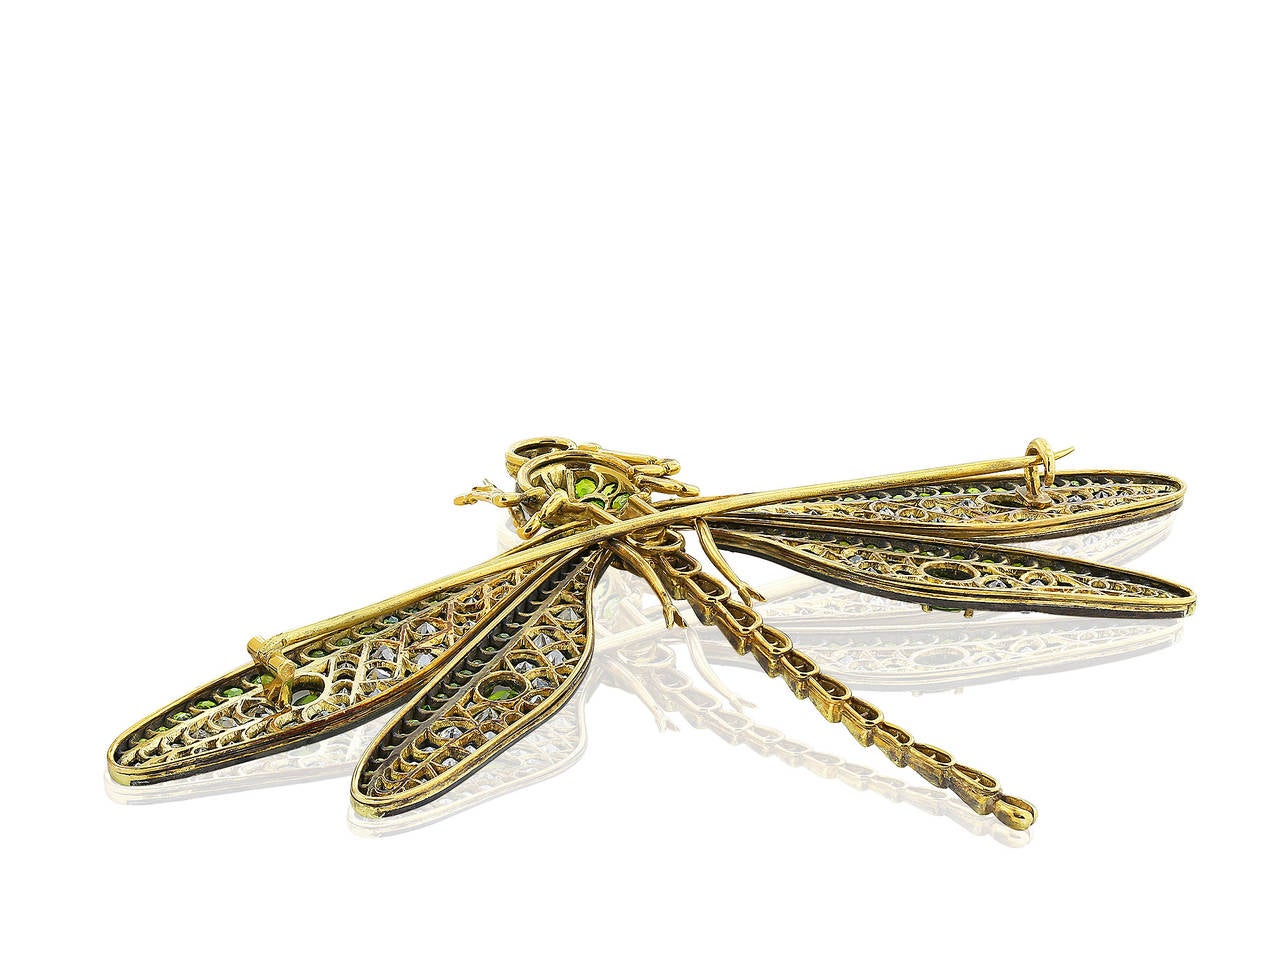 Sterling silver on 18 karat yellow gold vintage style dragonfly pin set with Old European cut diamonds and demantoid garnet accents with ruby eyes.